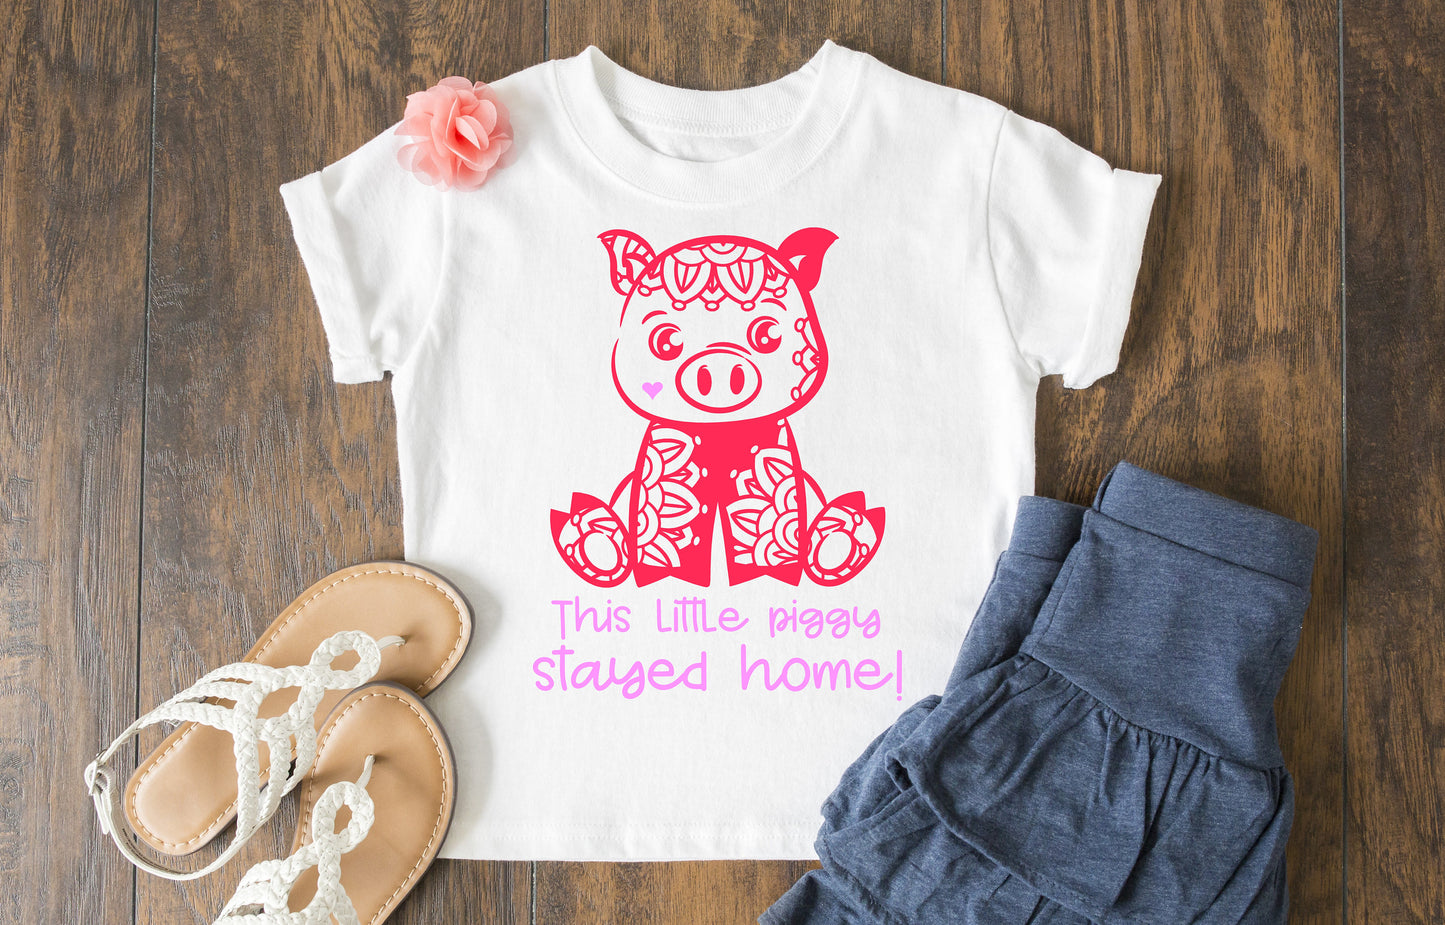 This Little Piggy Stayed Home Infant or Toddler Shirt or Bodysuit - homeschool shirt for girls - stay at home - stay home - stay home 2020